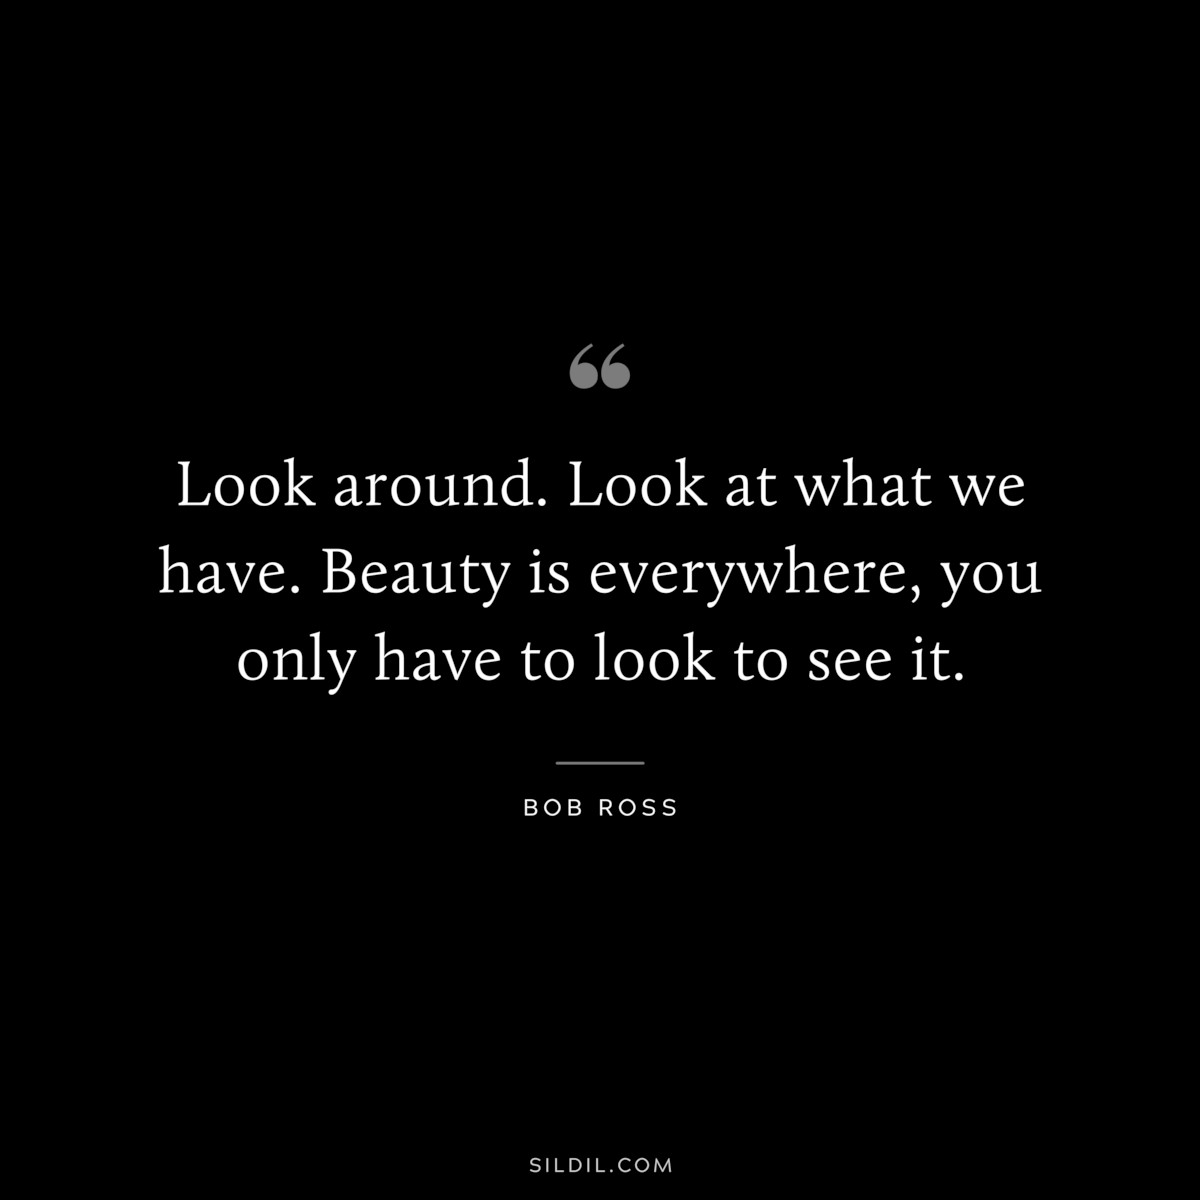 Look around. Look at what we have. Beauty is everywhere, you only have to look to see it. ― Bob Ross